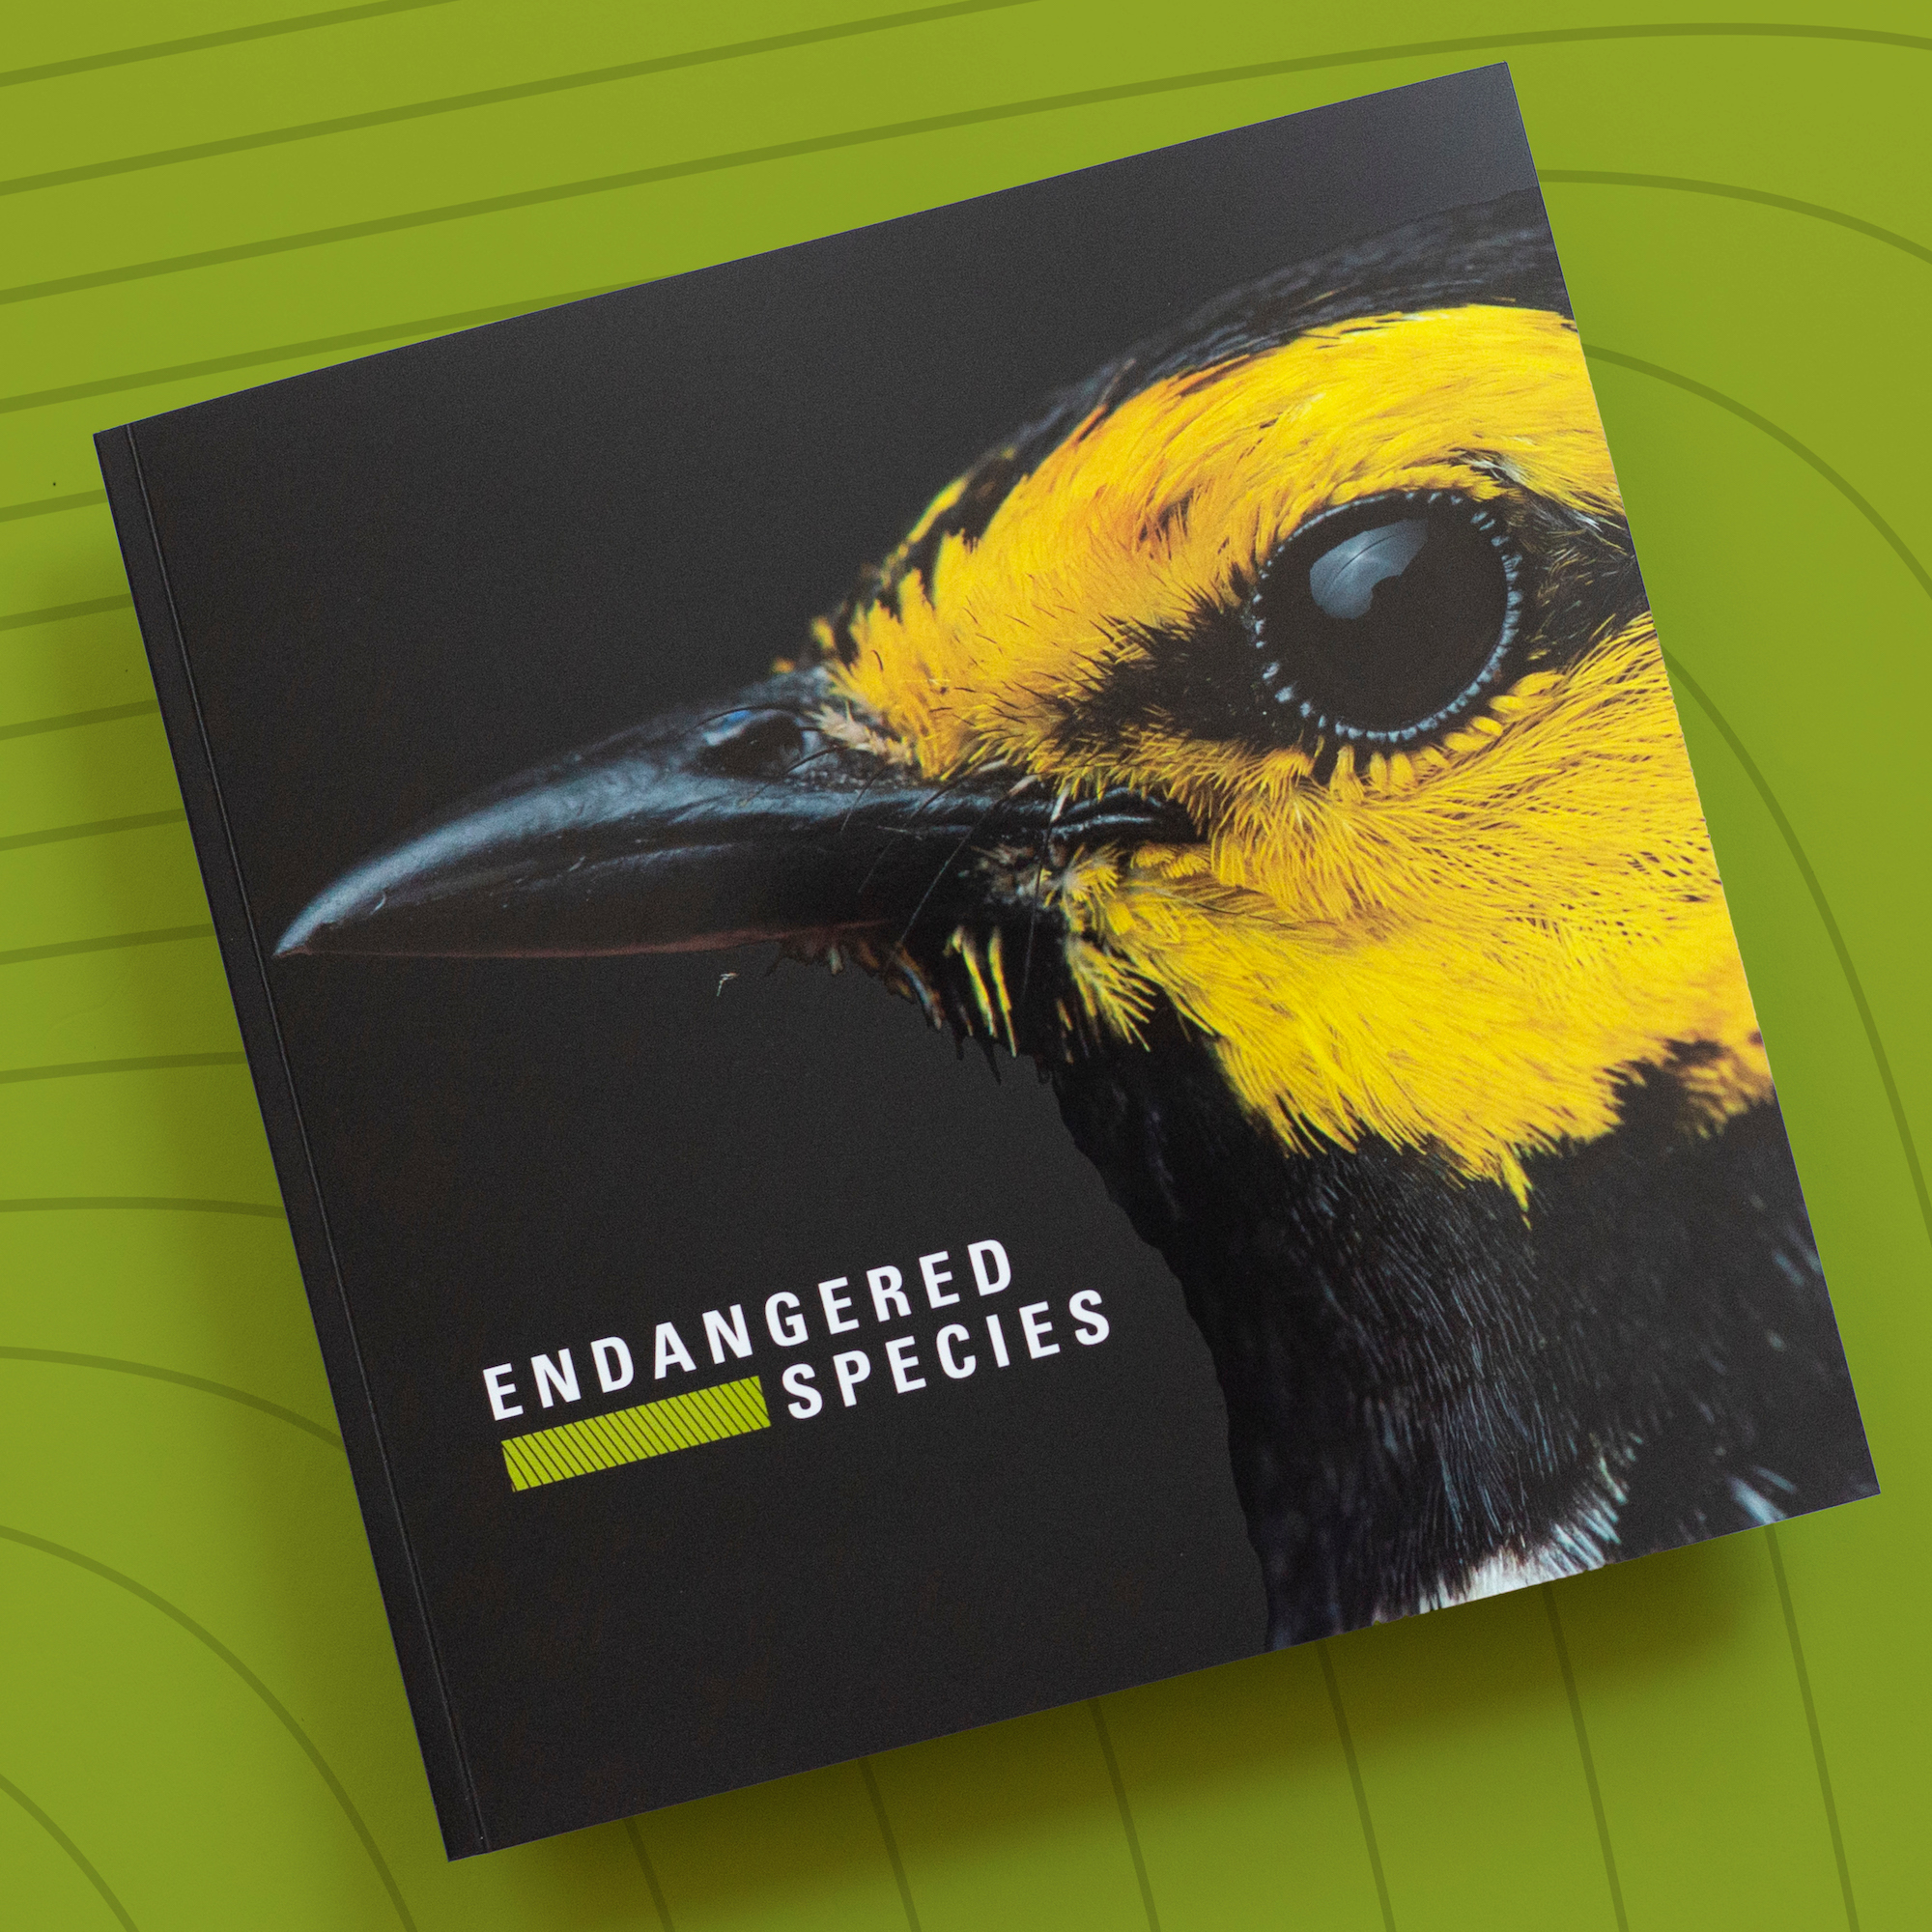 Endangered Species Limited Edition Collector’s Set